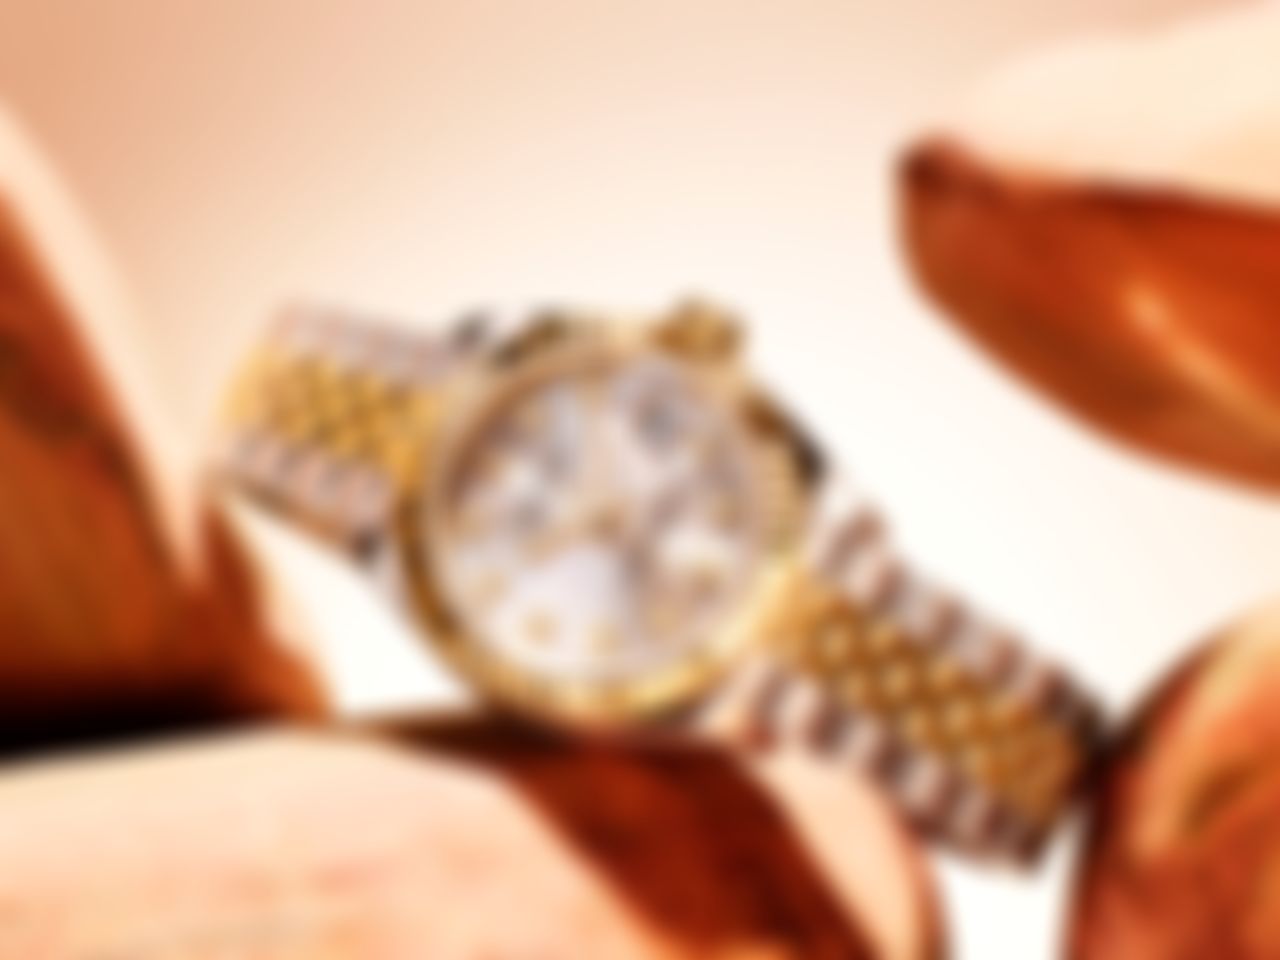 LADY-DATEJUST, THE ROLEX OF CHOICE FOR DEMANDING WOMEN